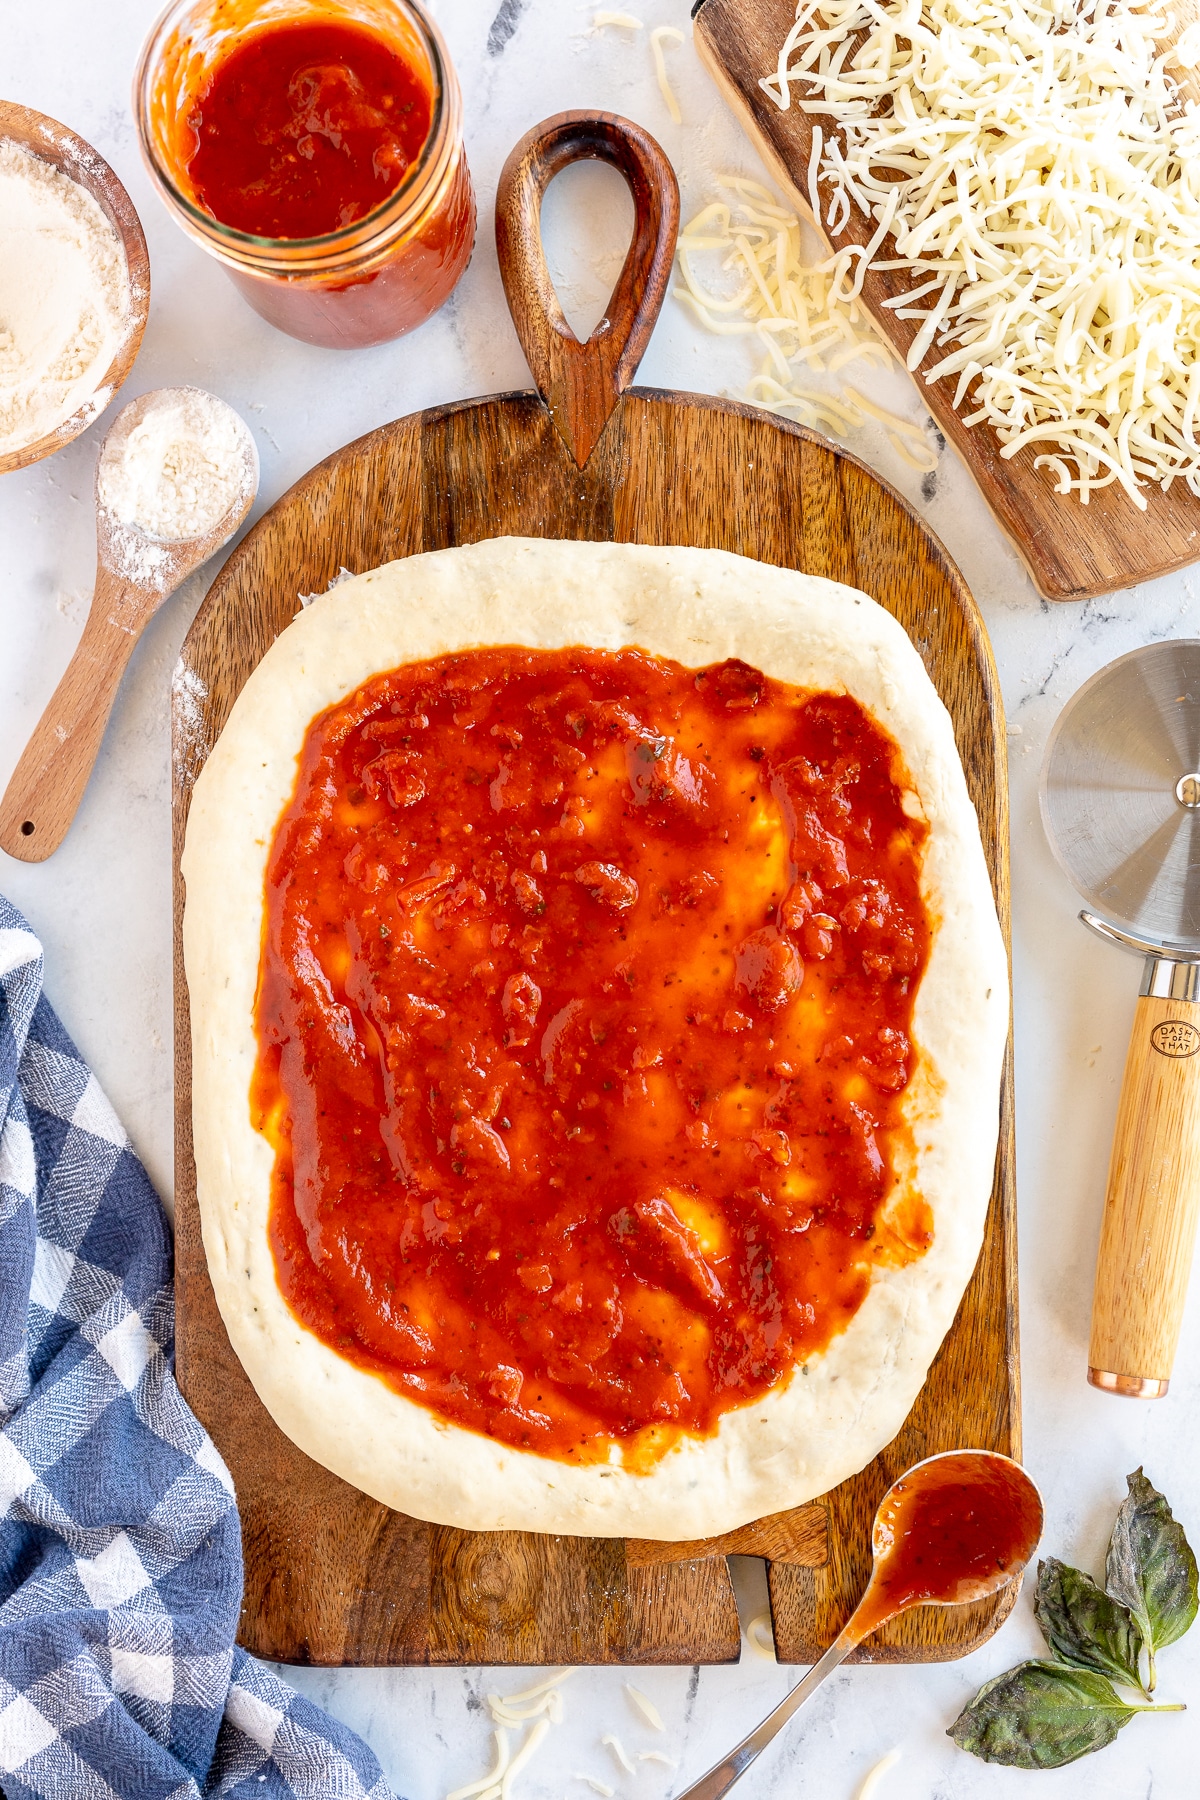 An Easy Pizza dough recipe you can make with your kids. It requires minimal ingredients and is simple to prep for a meal.